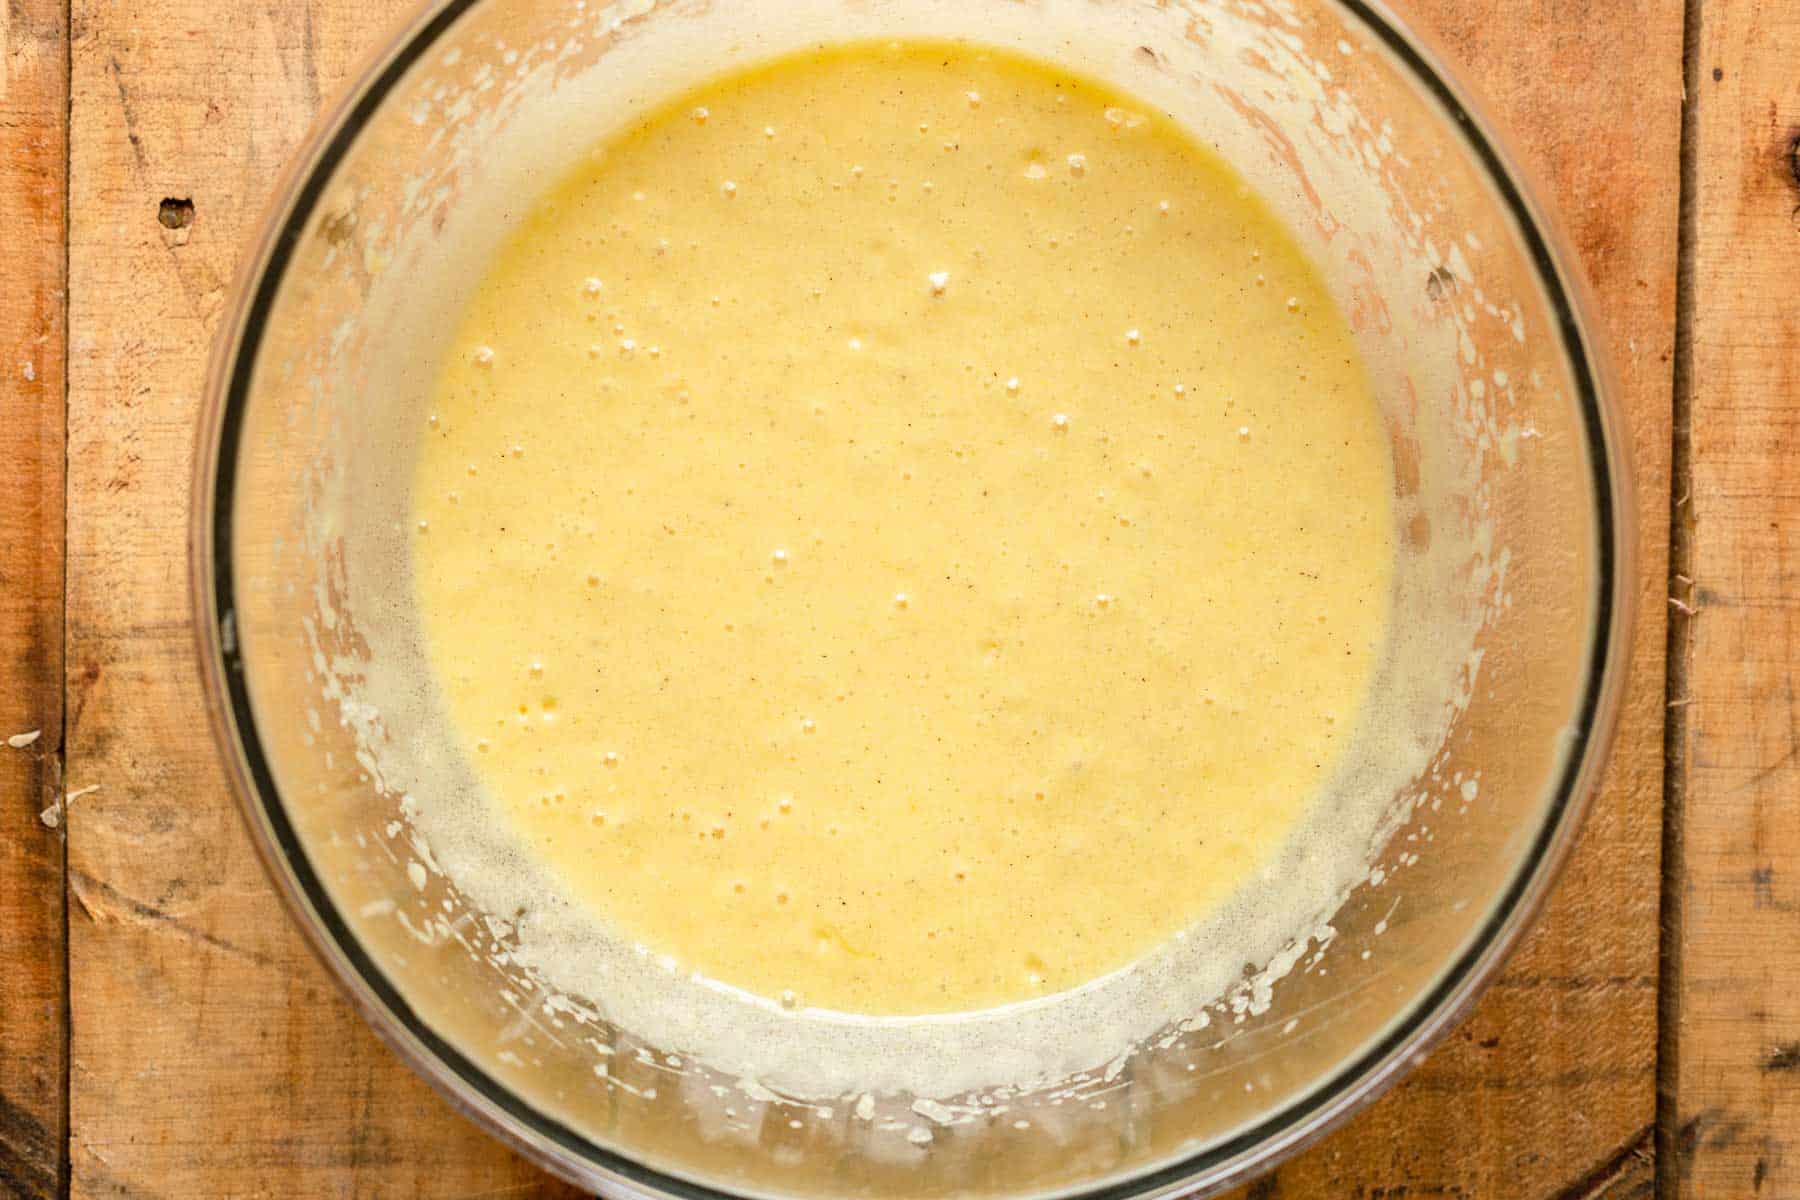 liquid cake batter in a mixing bowl